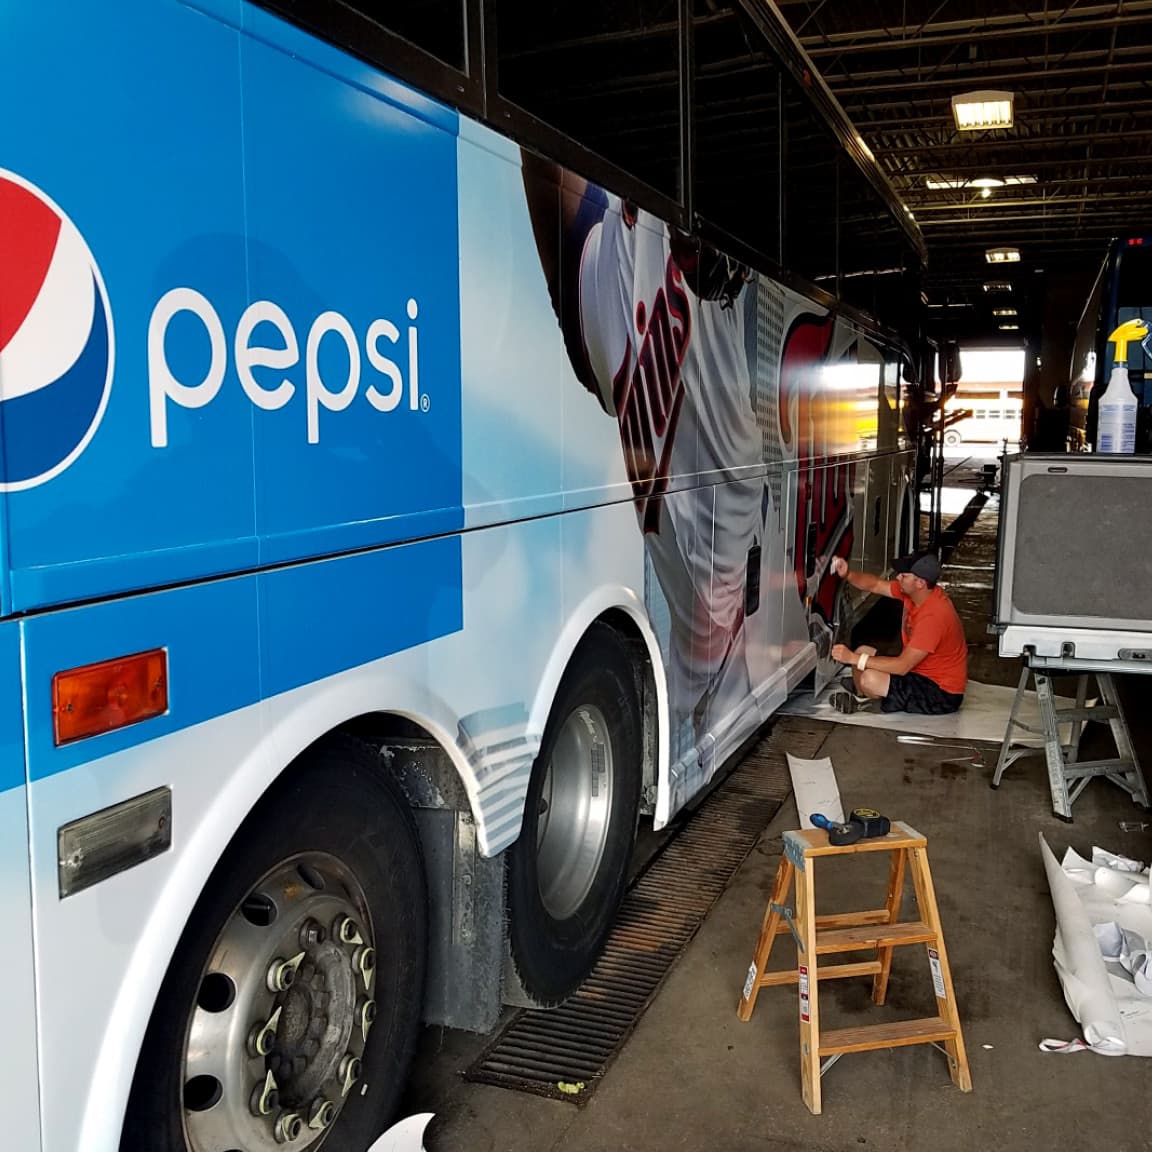 Twins Bus Wrap with a Pepsi Ad